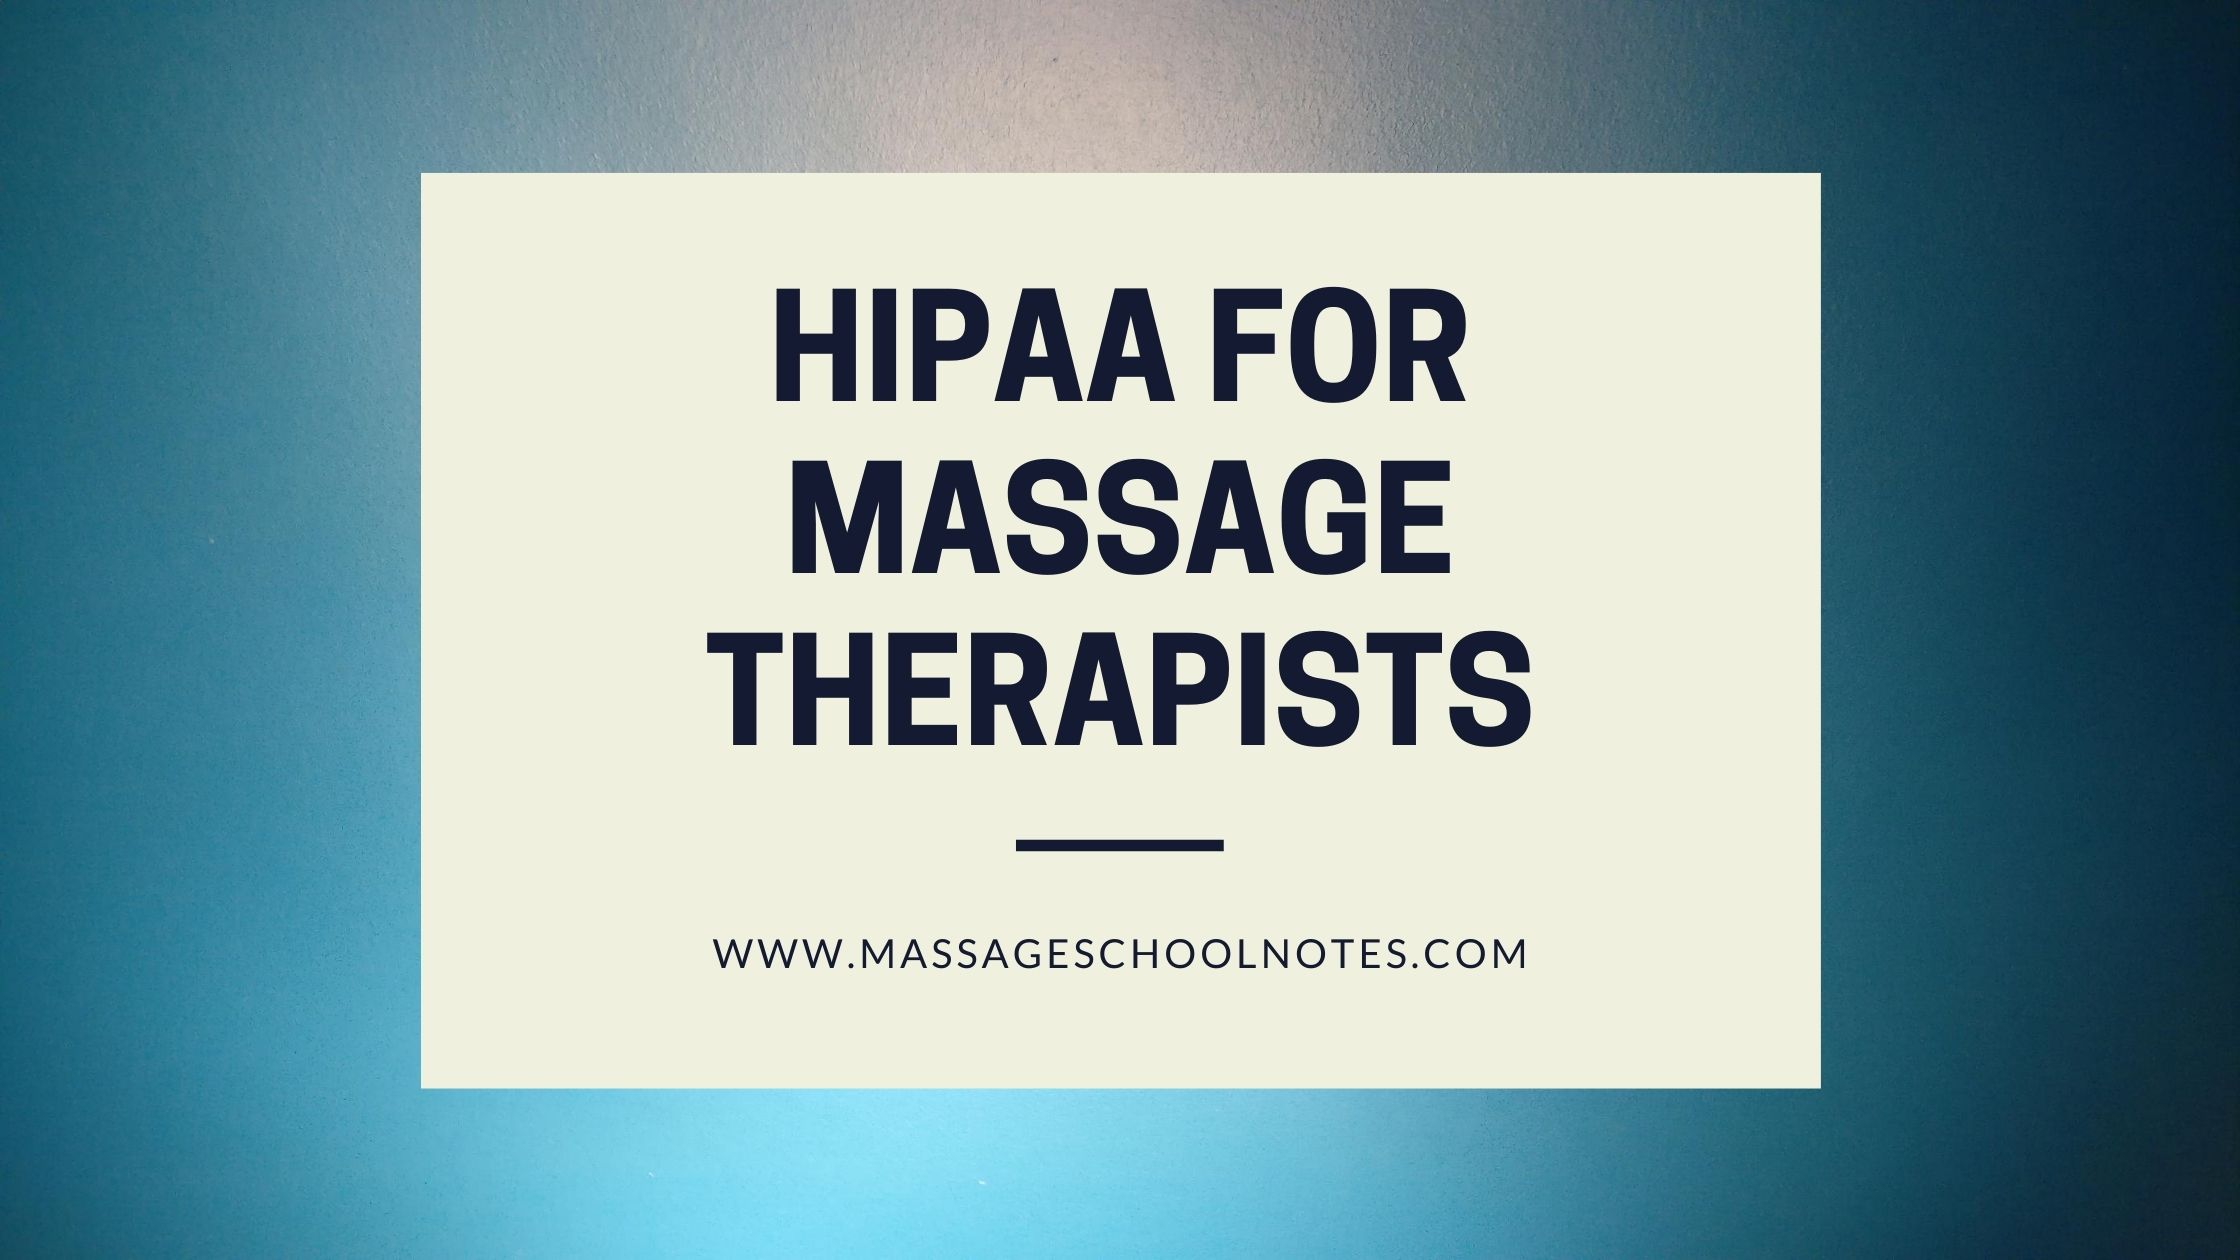 HIPAA for Massage Therapists